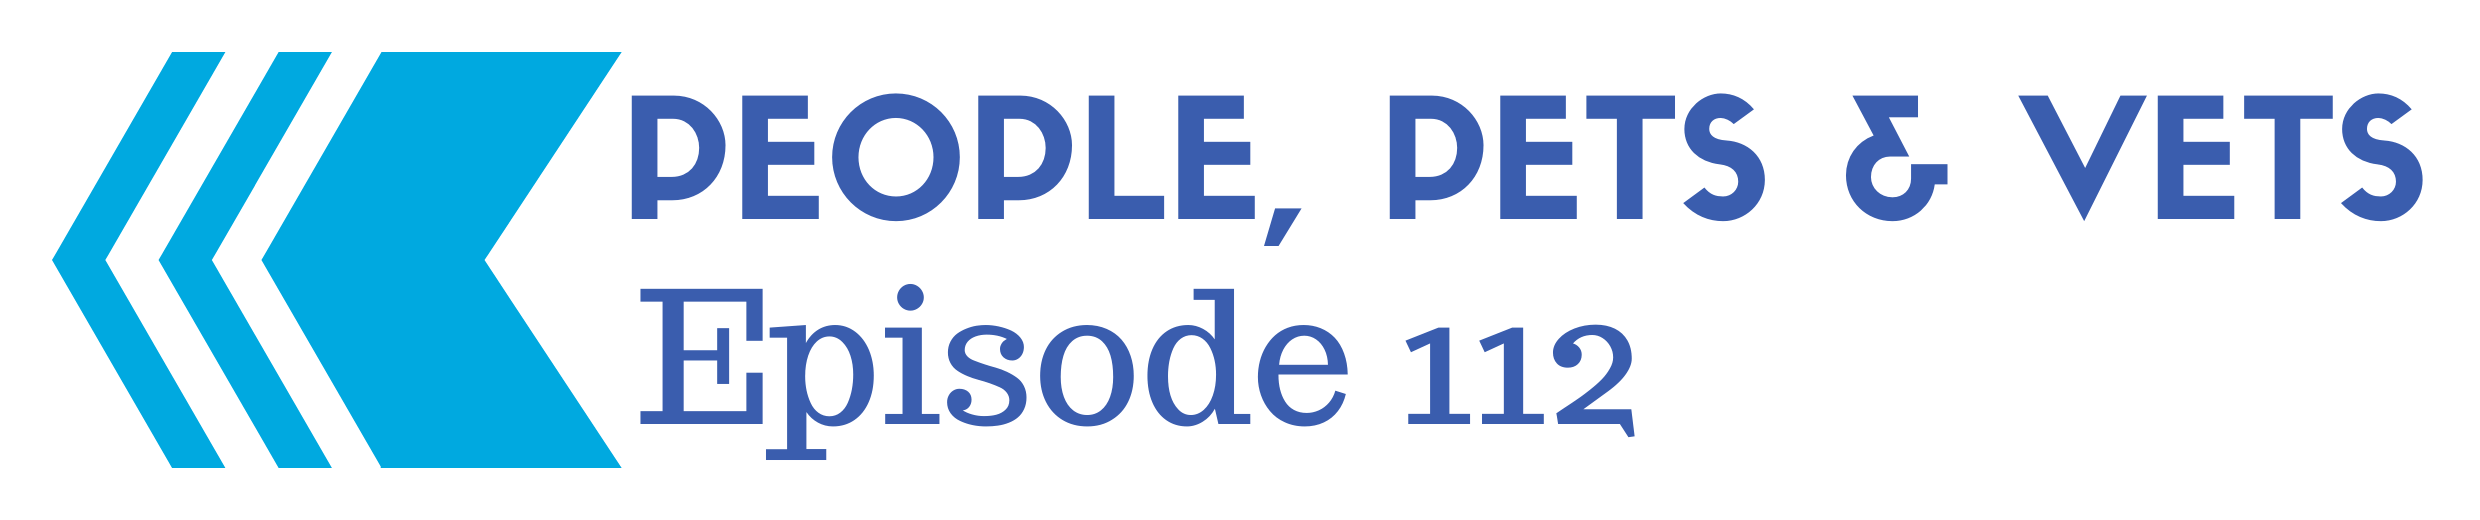 Back to Episode 112